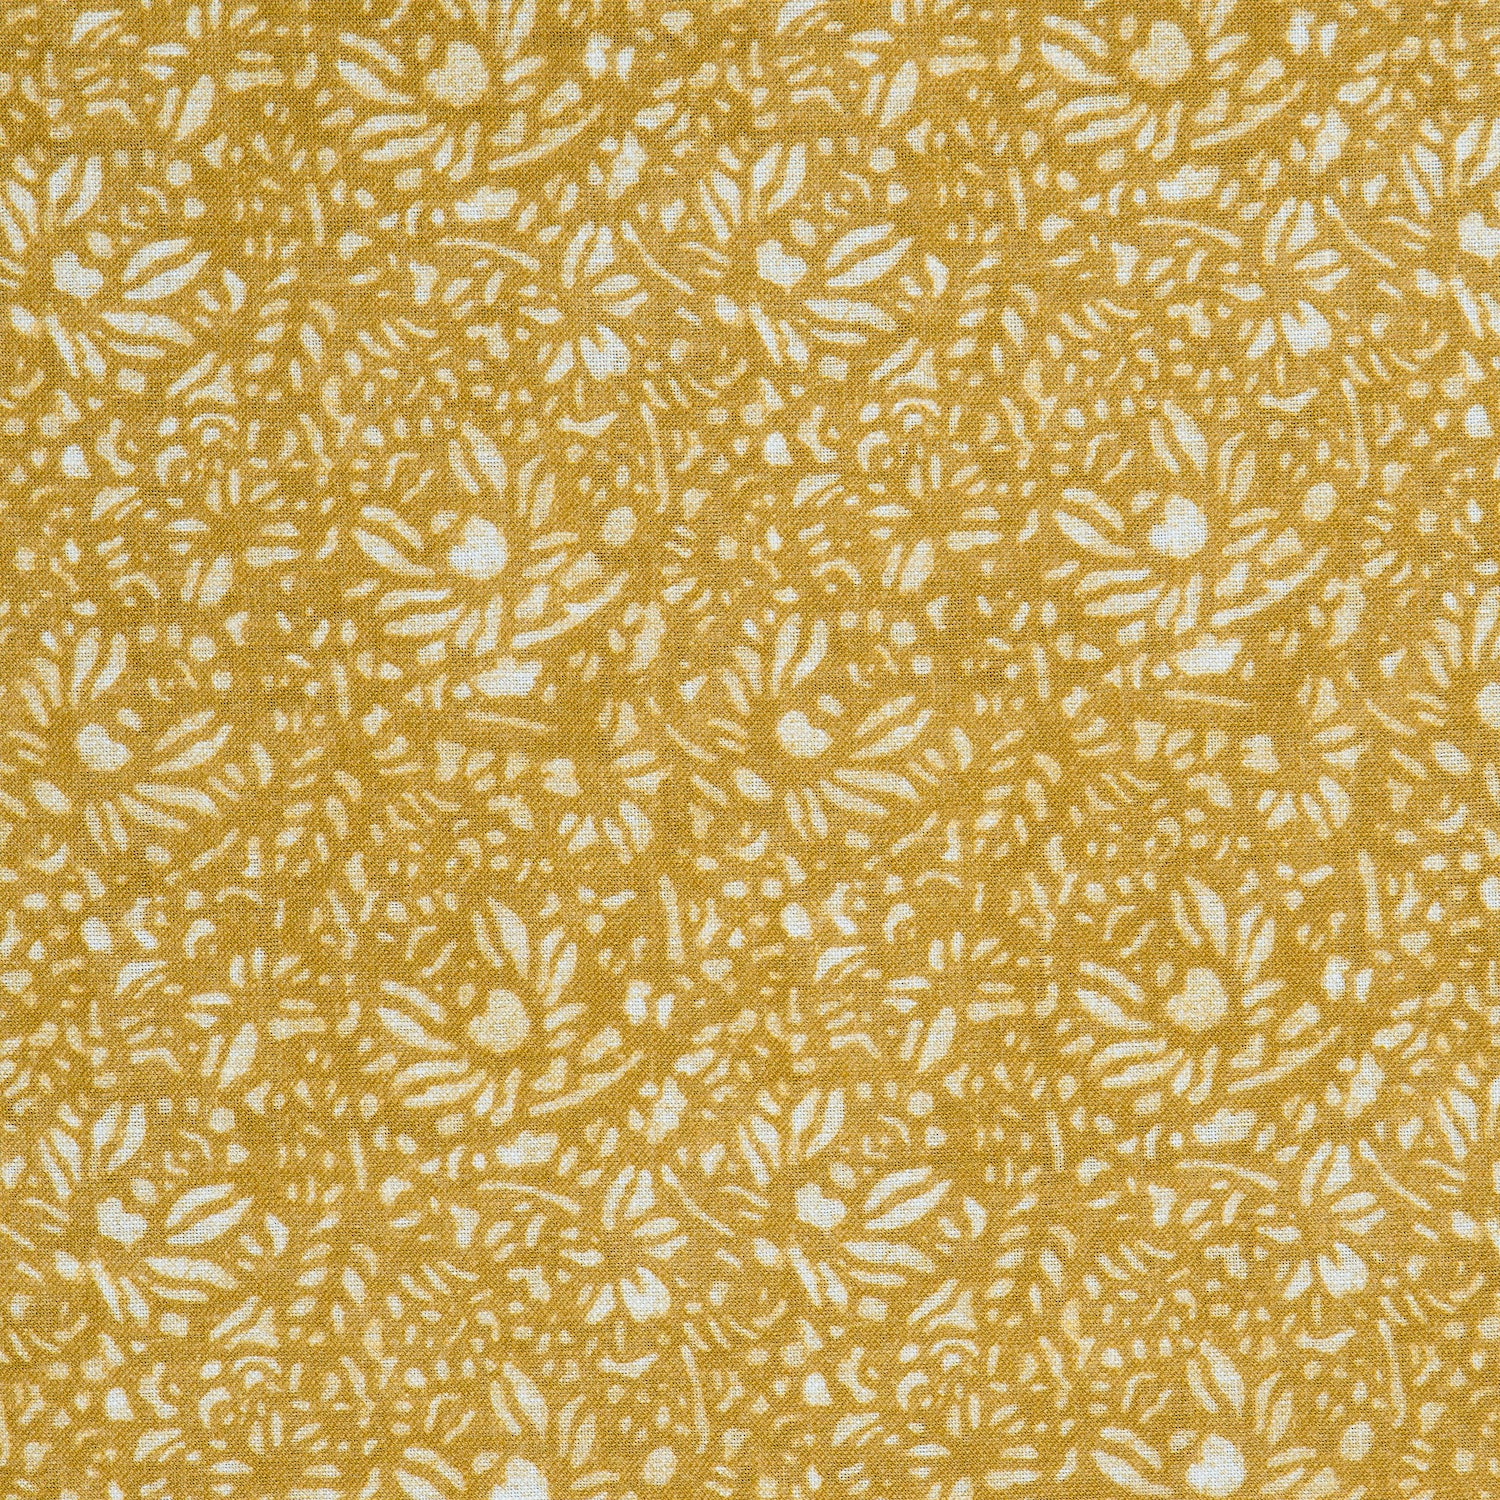 Detail of a printed linen fabric in a repeating chrysanthemum pattern in white on a mustard field.